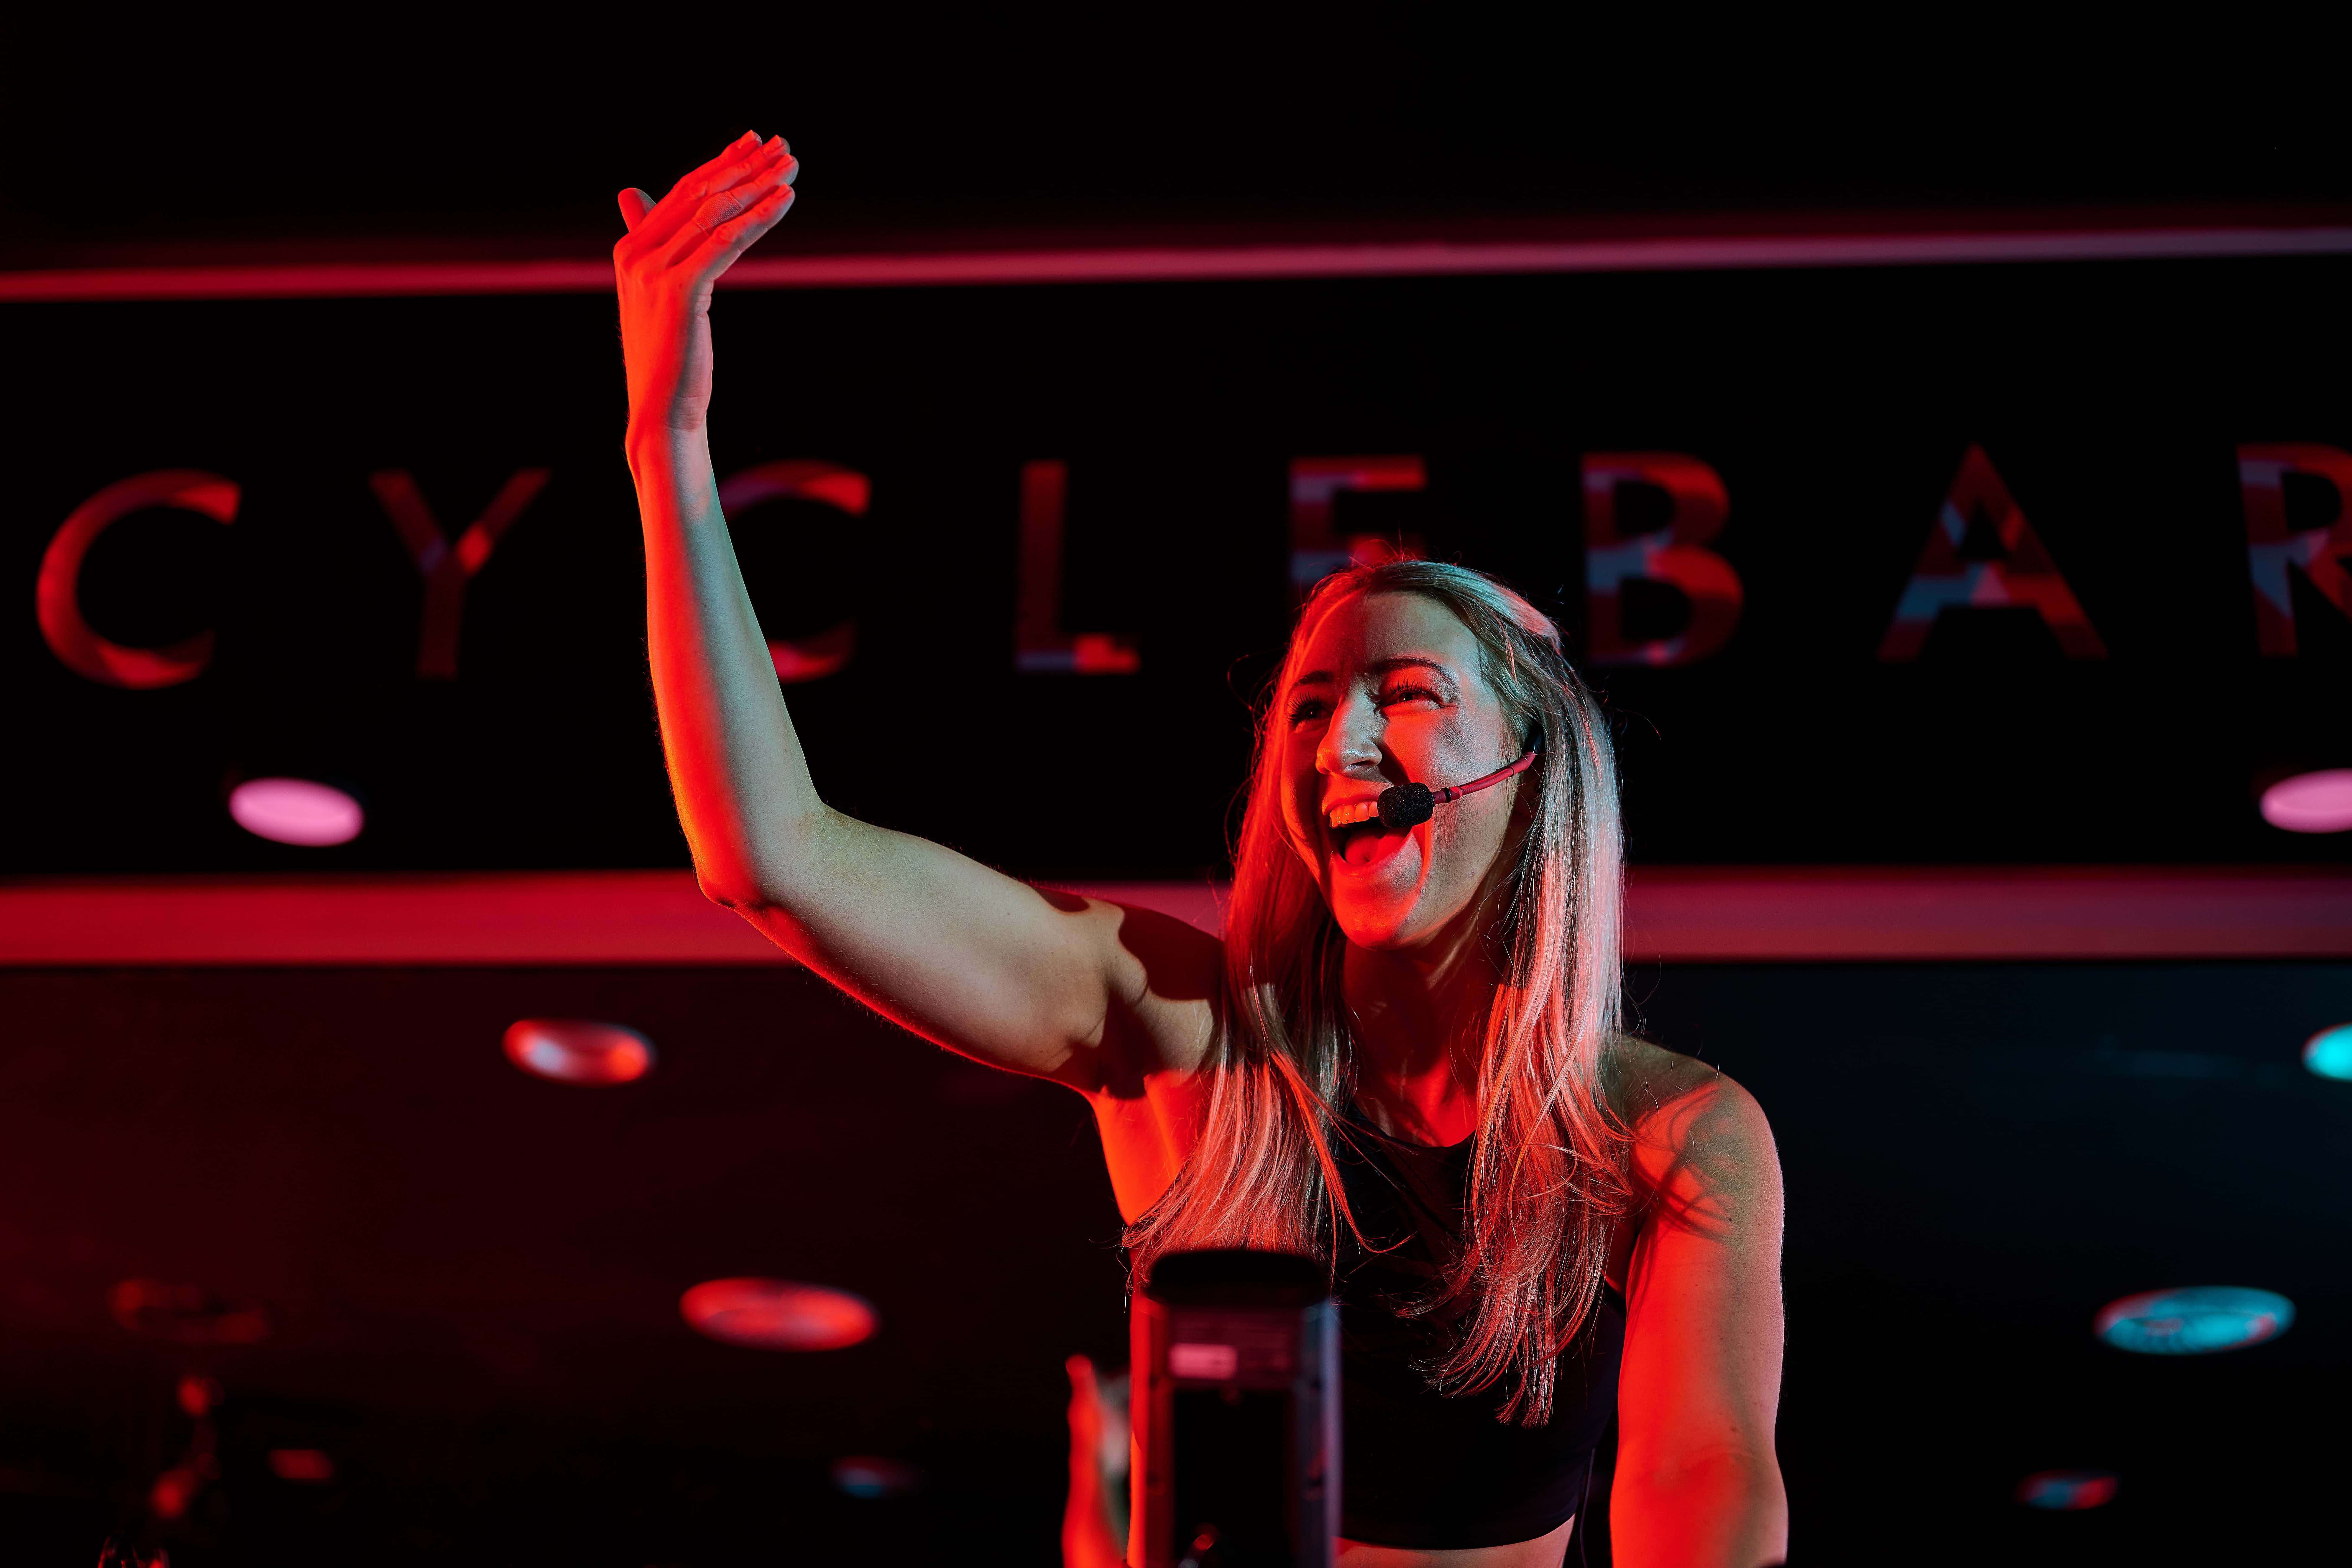 Cyclebar Fitzroy: 7 Reasons to Ride with Melbourne's Best Cycle Classes